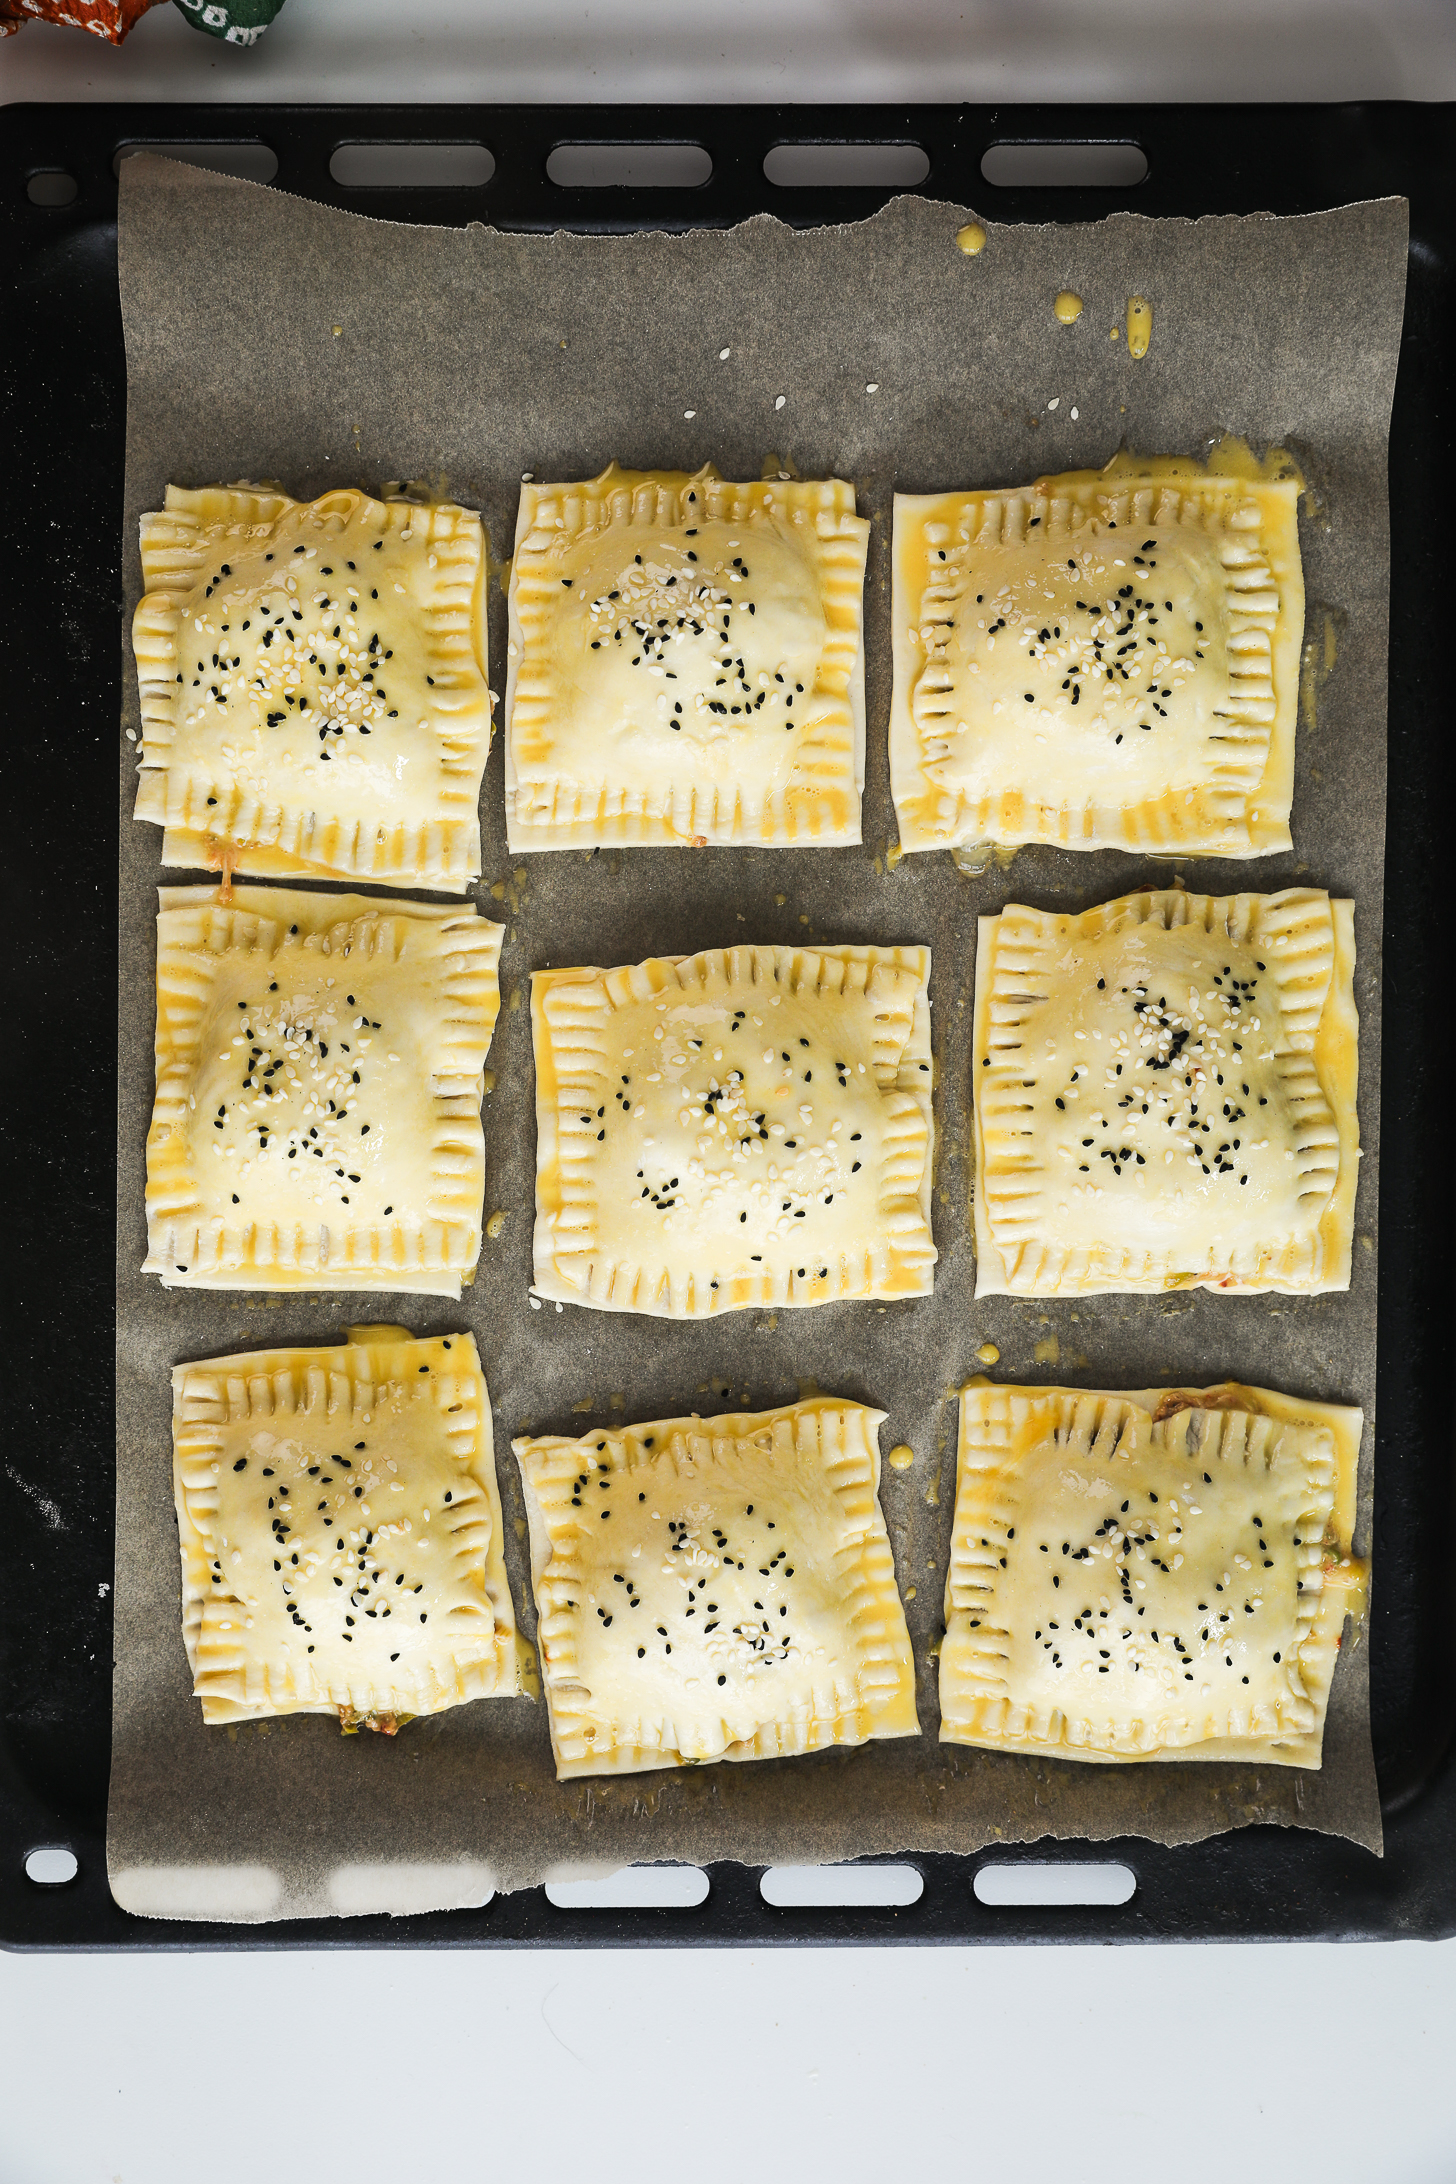 Top-down image of an oven tray lined with unbaked puff pastry squares, each filled with a filling, brushed with egg wash, and sprinkled with seeds.